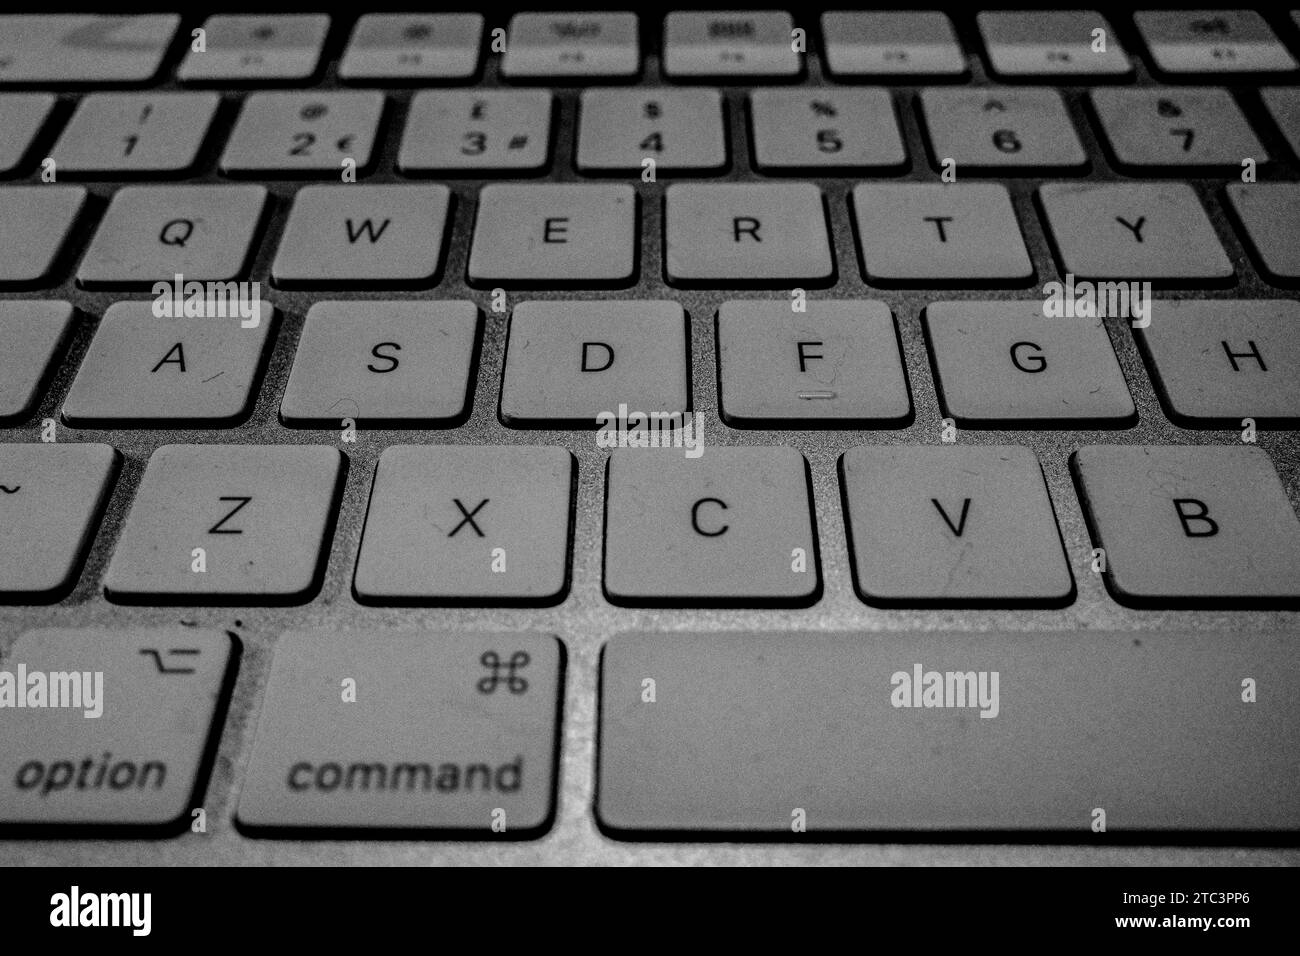 Close up of the typical Apple Mac Wireless Keyboard. Showing keys at an angle to fill the image. Command key. Concept, Abstract. Stock Photo